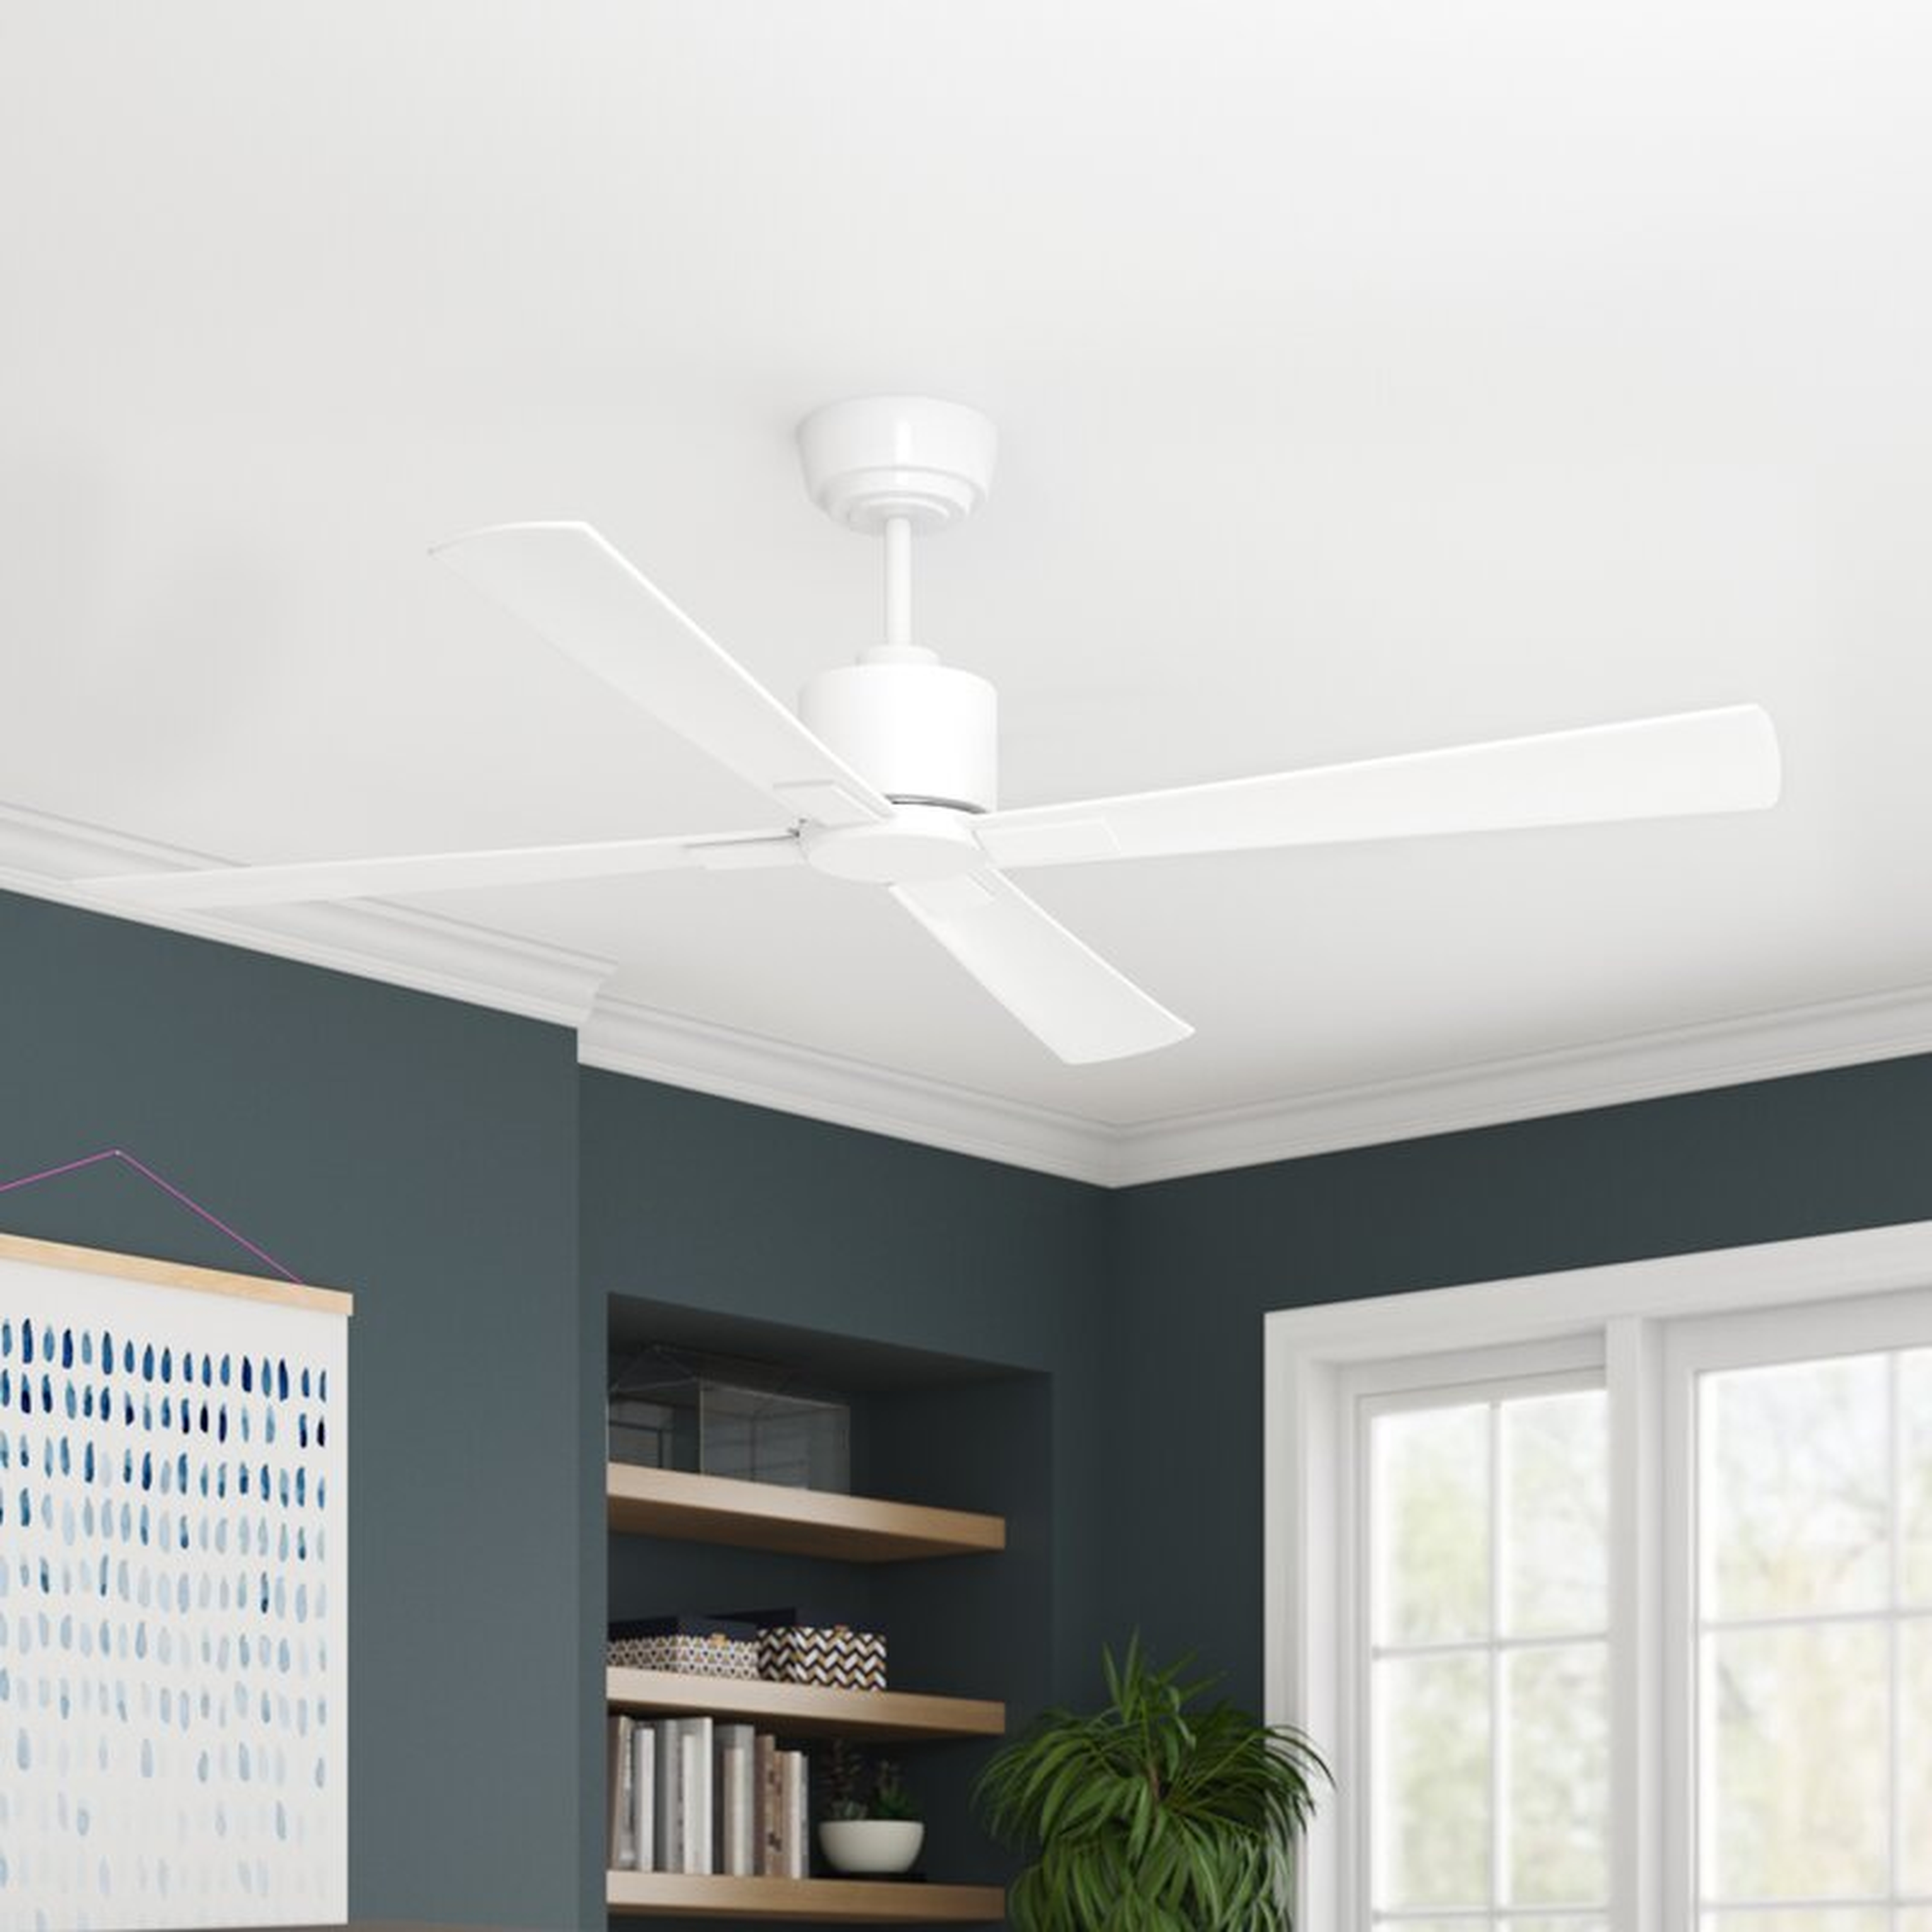 52" Sheilds 4 Blade Ceiling Fan with Remote - Wayfair